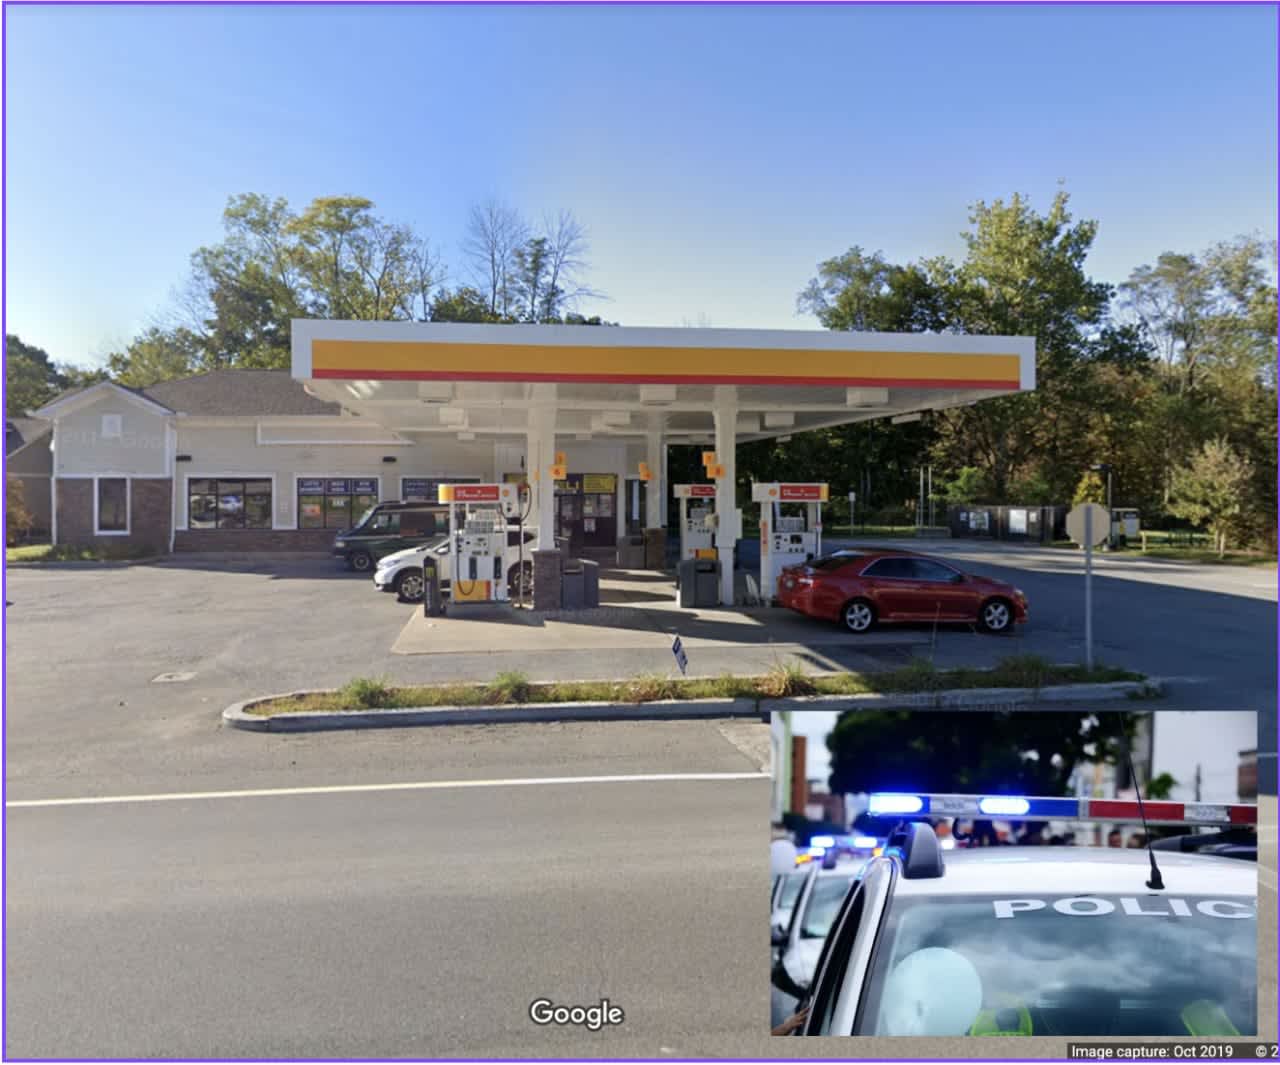 The area of the armed robbery.